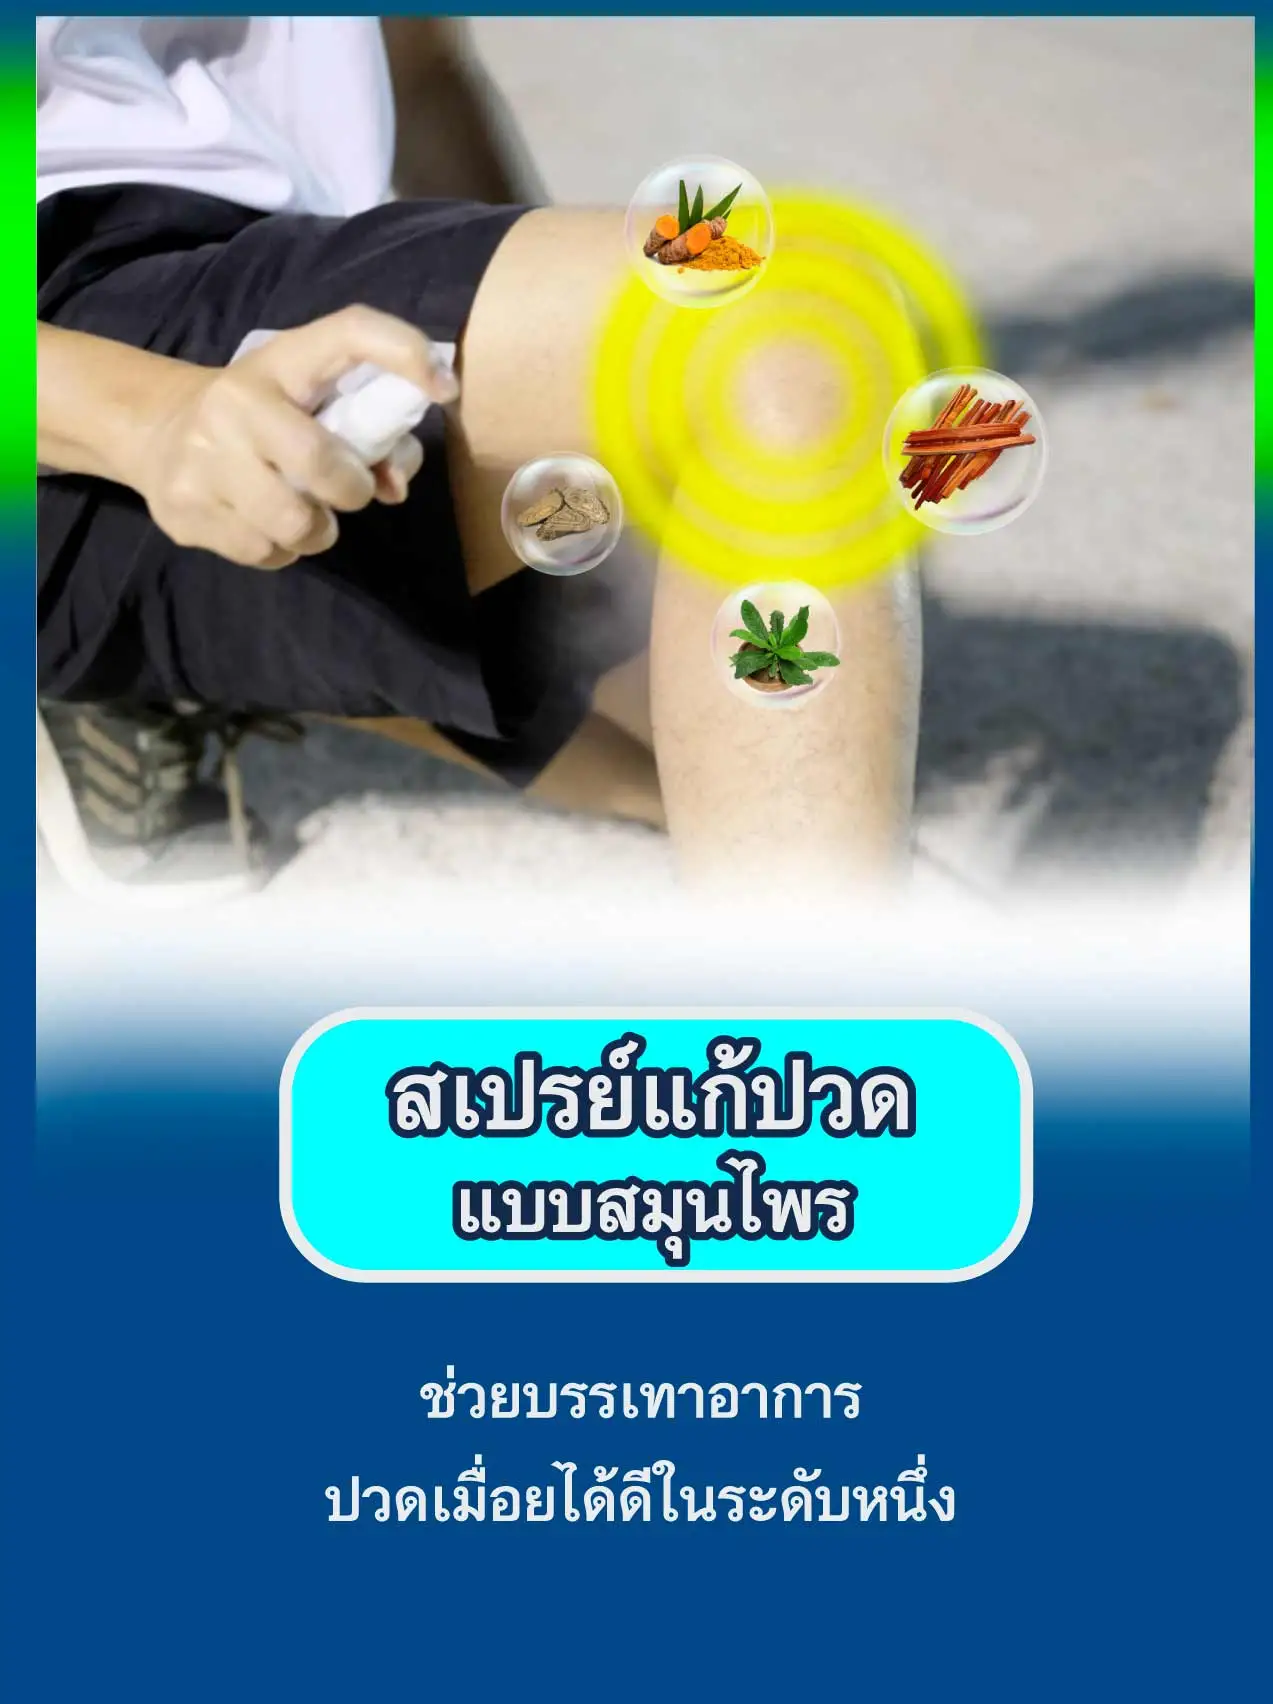 1-6-Knee-joint-spray-Medicine-for-knee-pain-relief